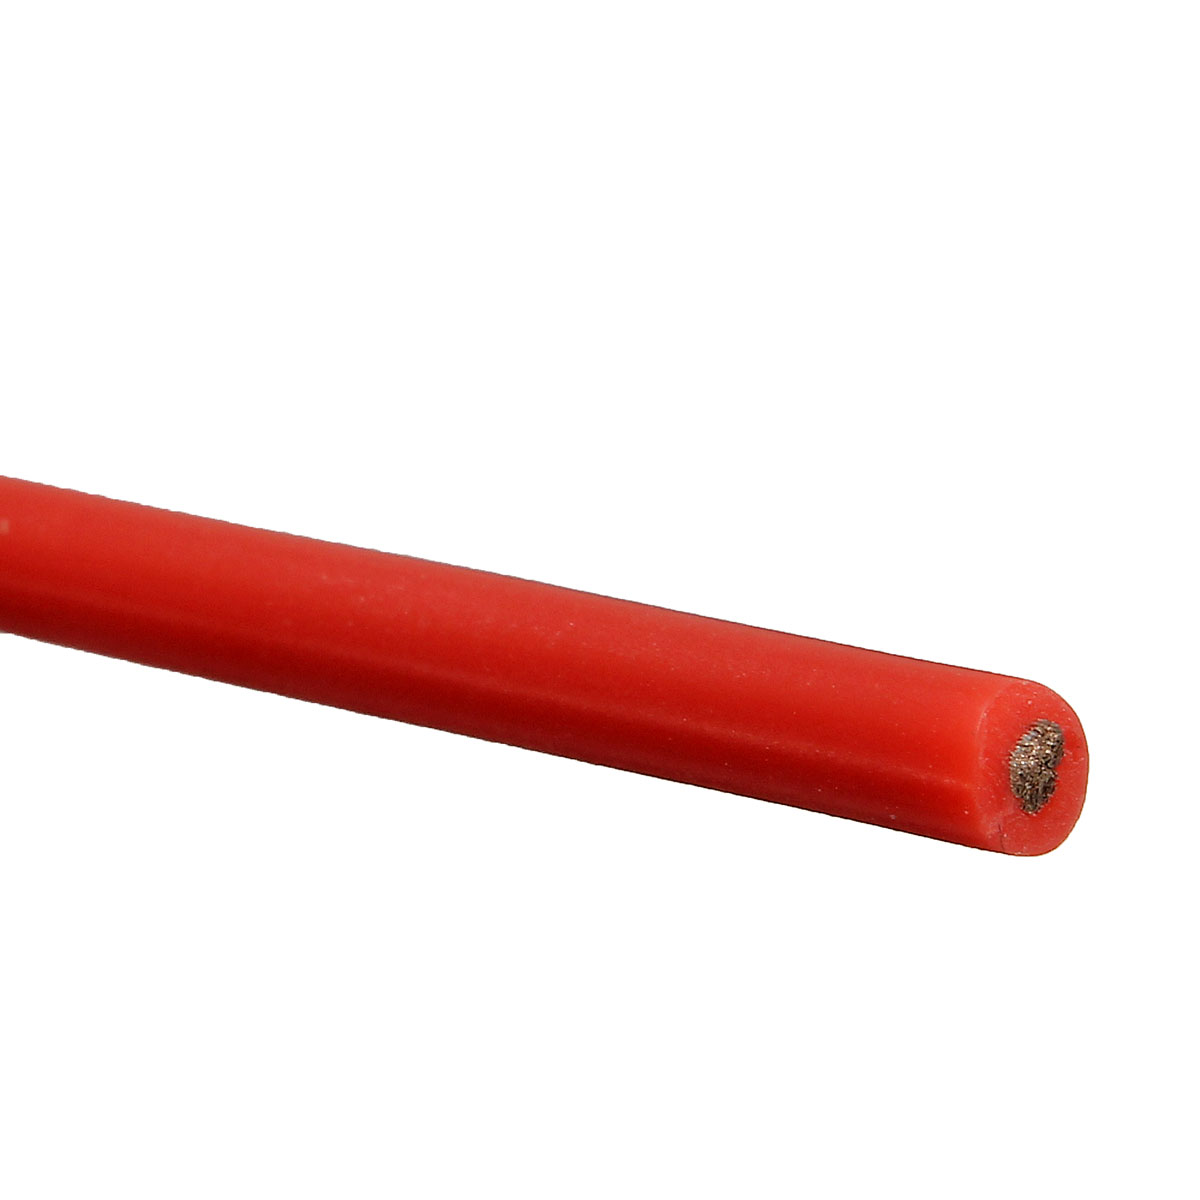 DANIU-2-Meter-Red-Silicone-Wire-Cable-10121416182022AWG-Flexible-Cable-1170284-9